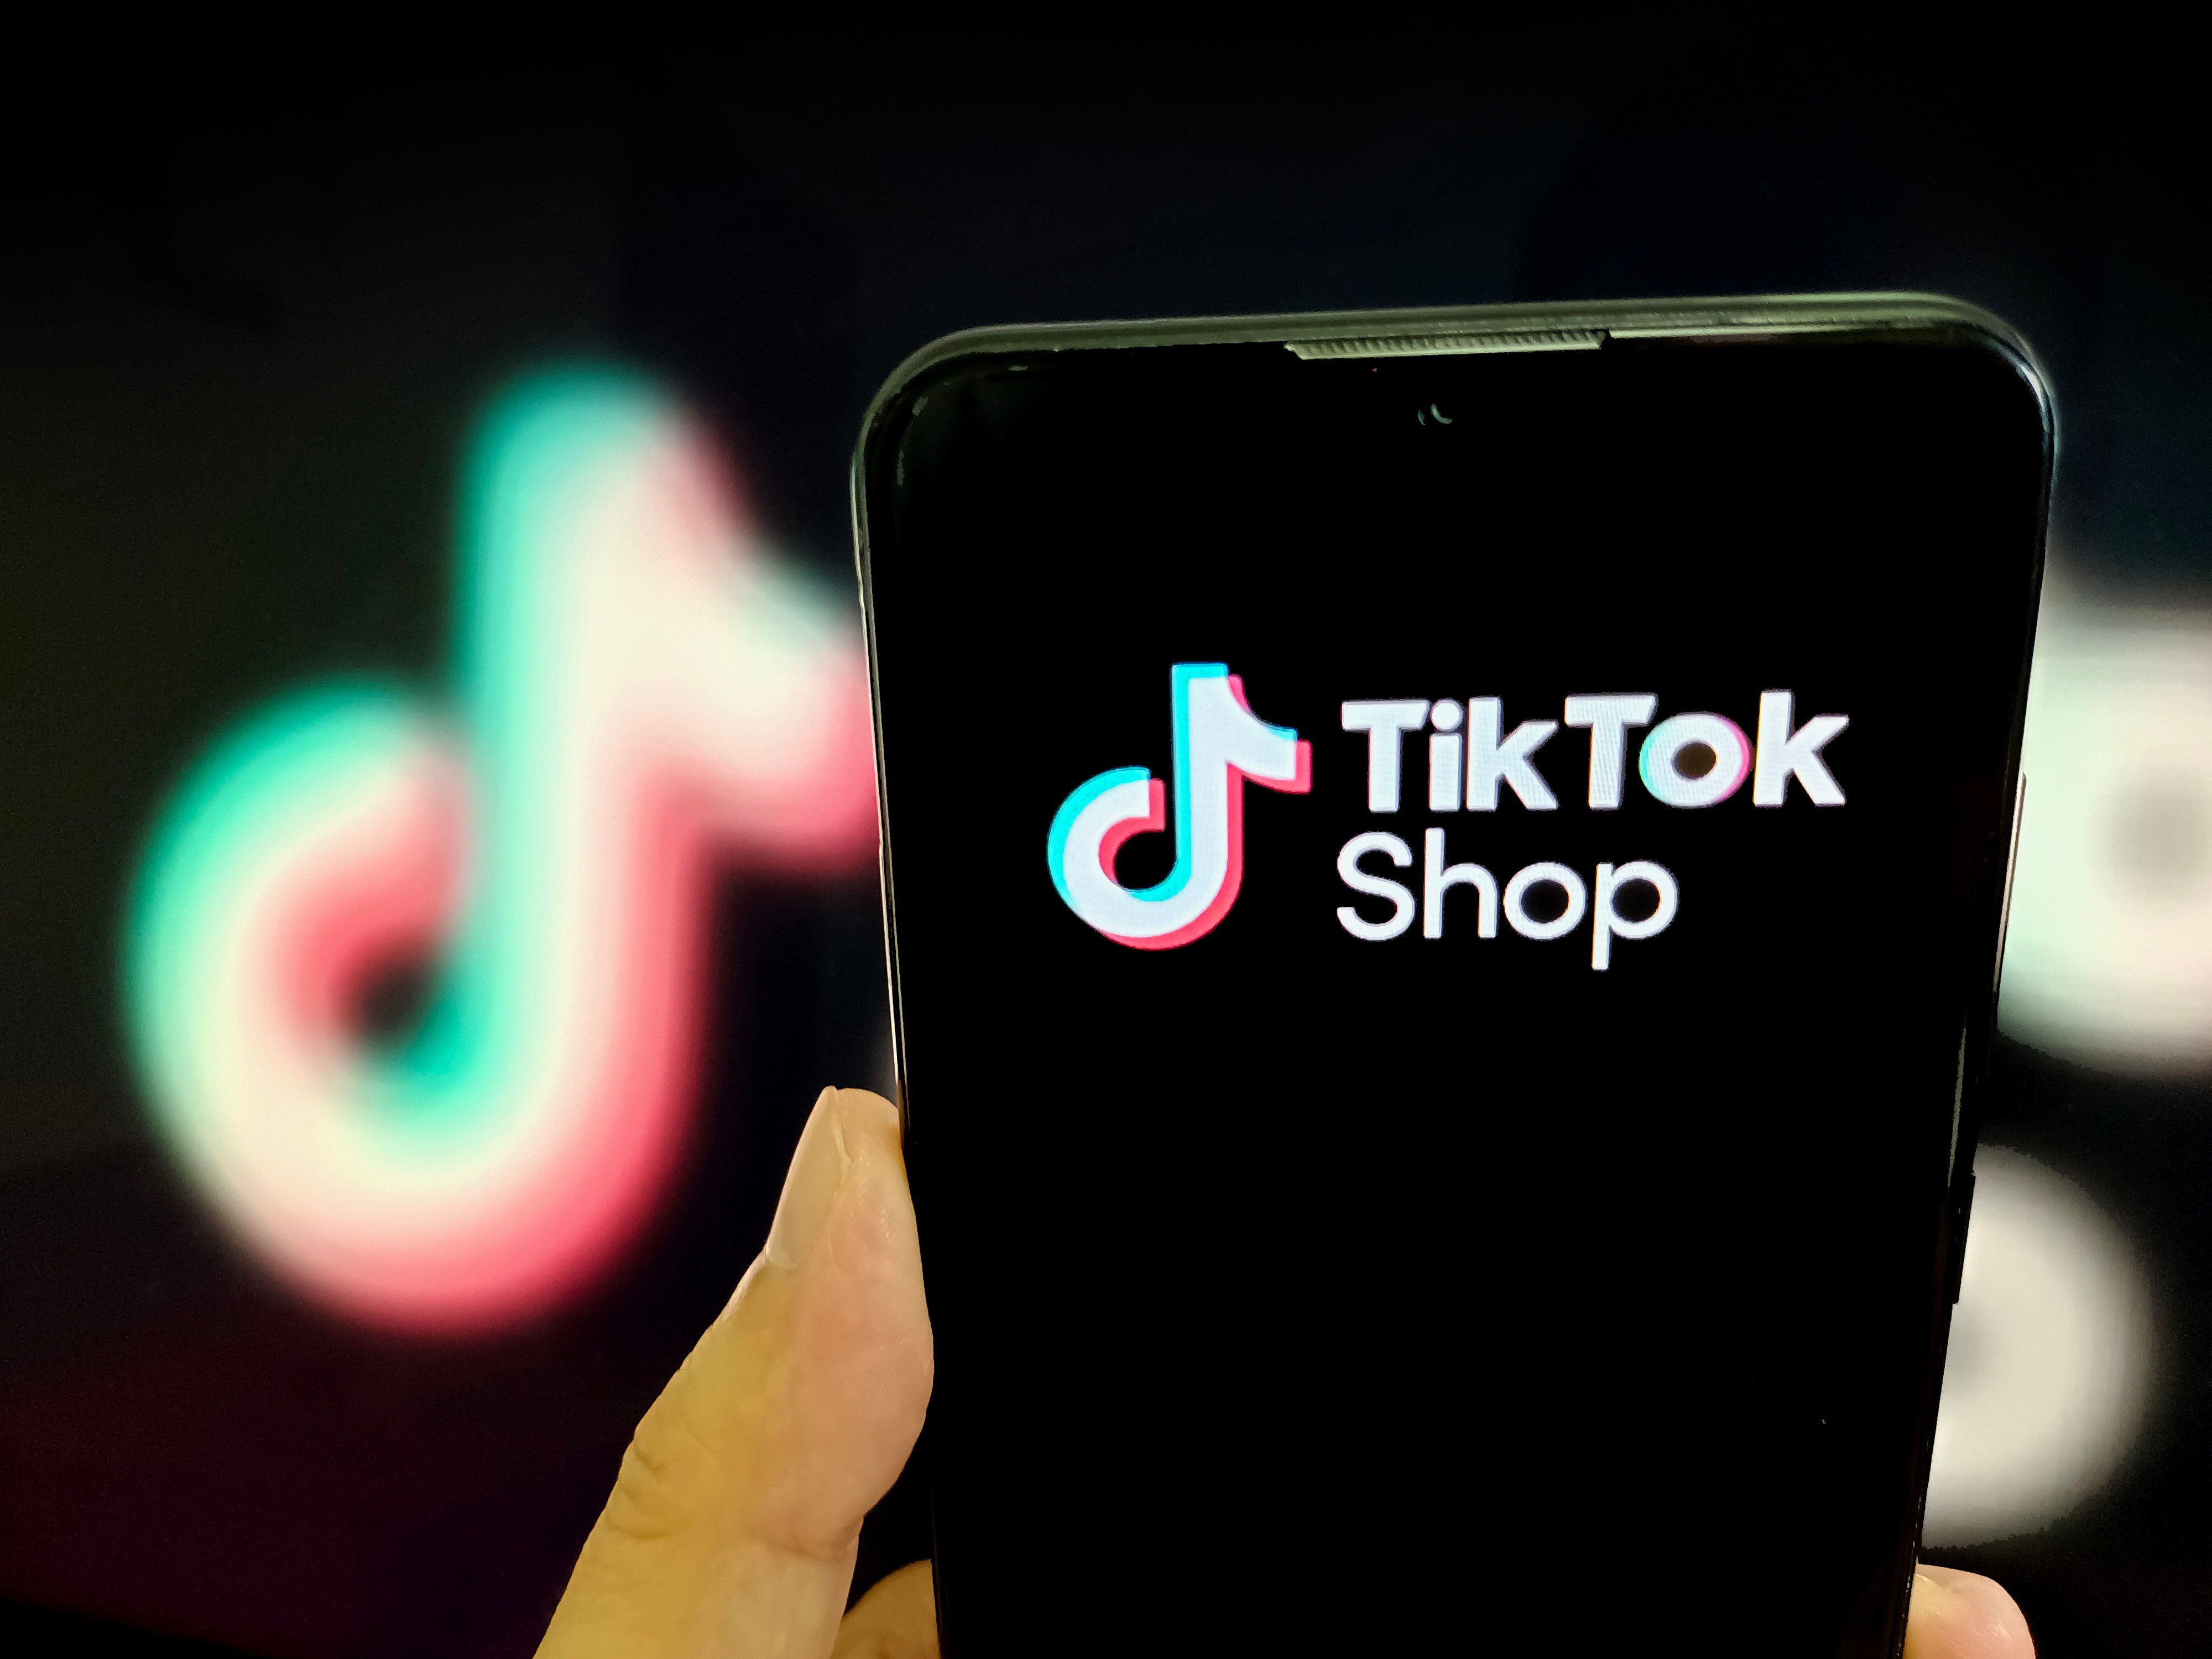 TikTok Shop had more than 15 million online merchants worldwide as of December last year. Photo: Getty Images